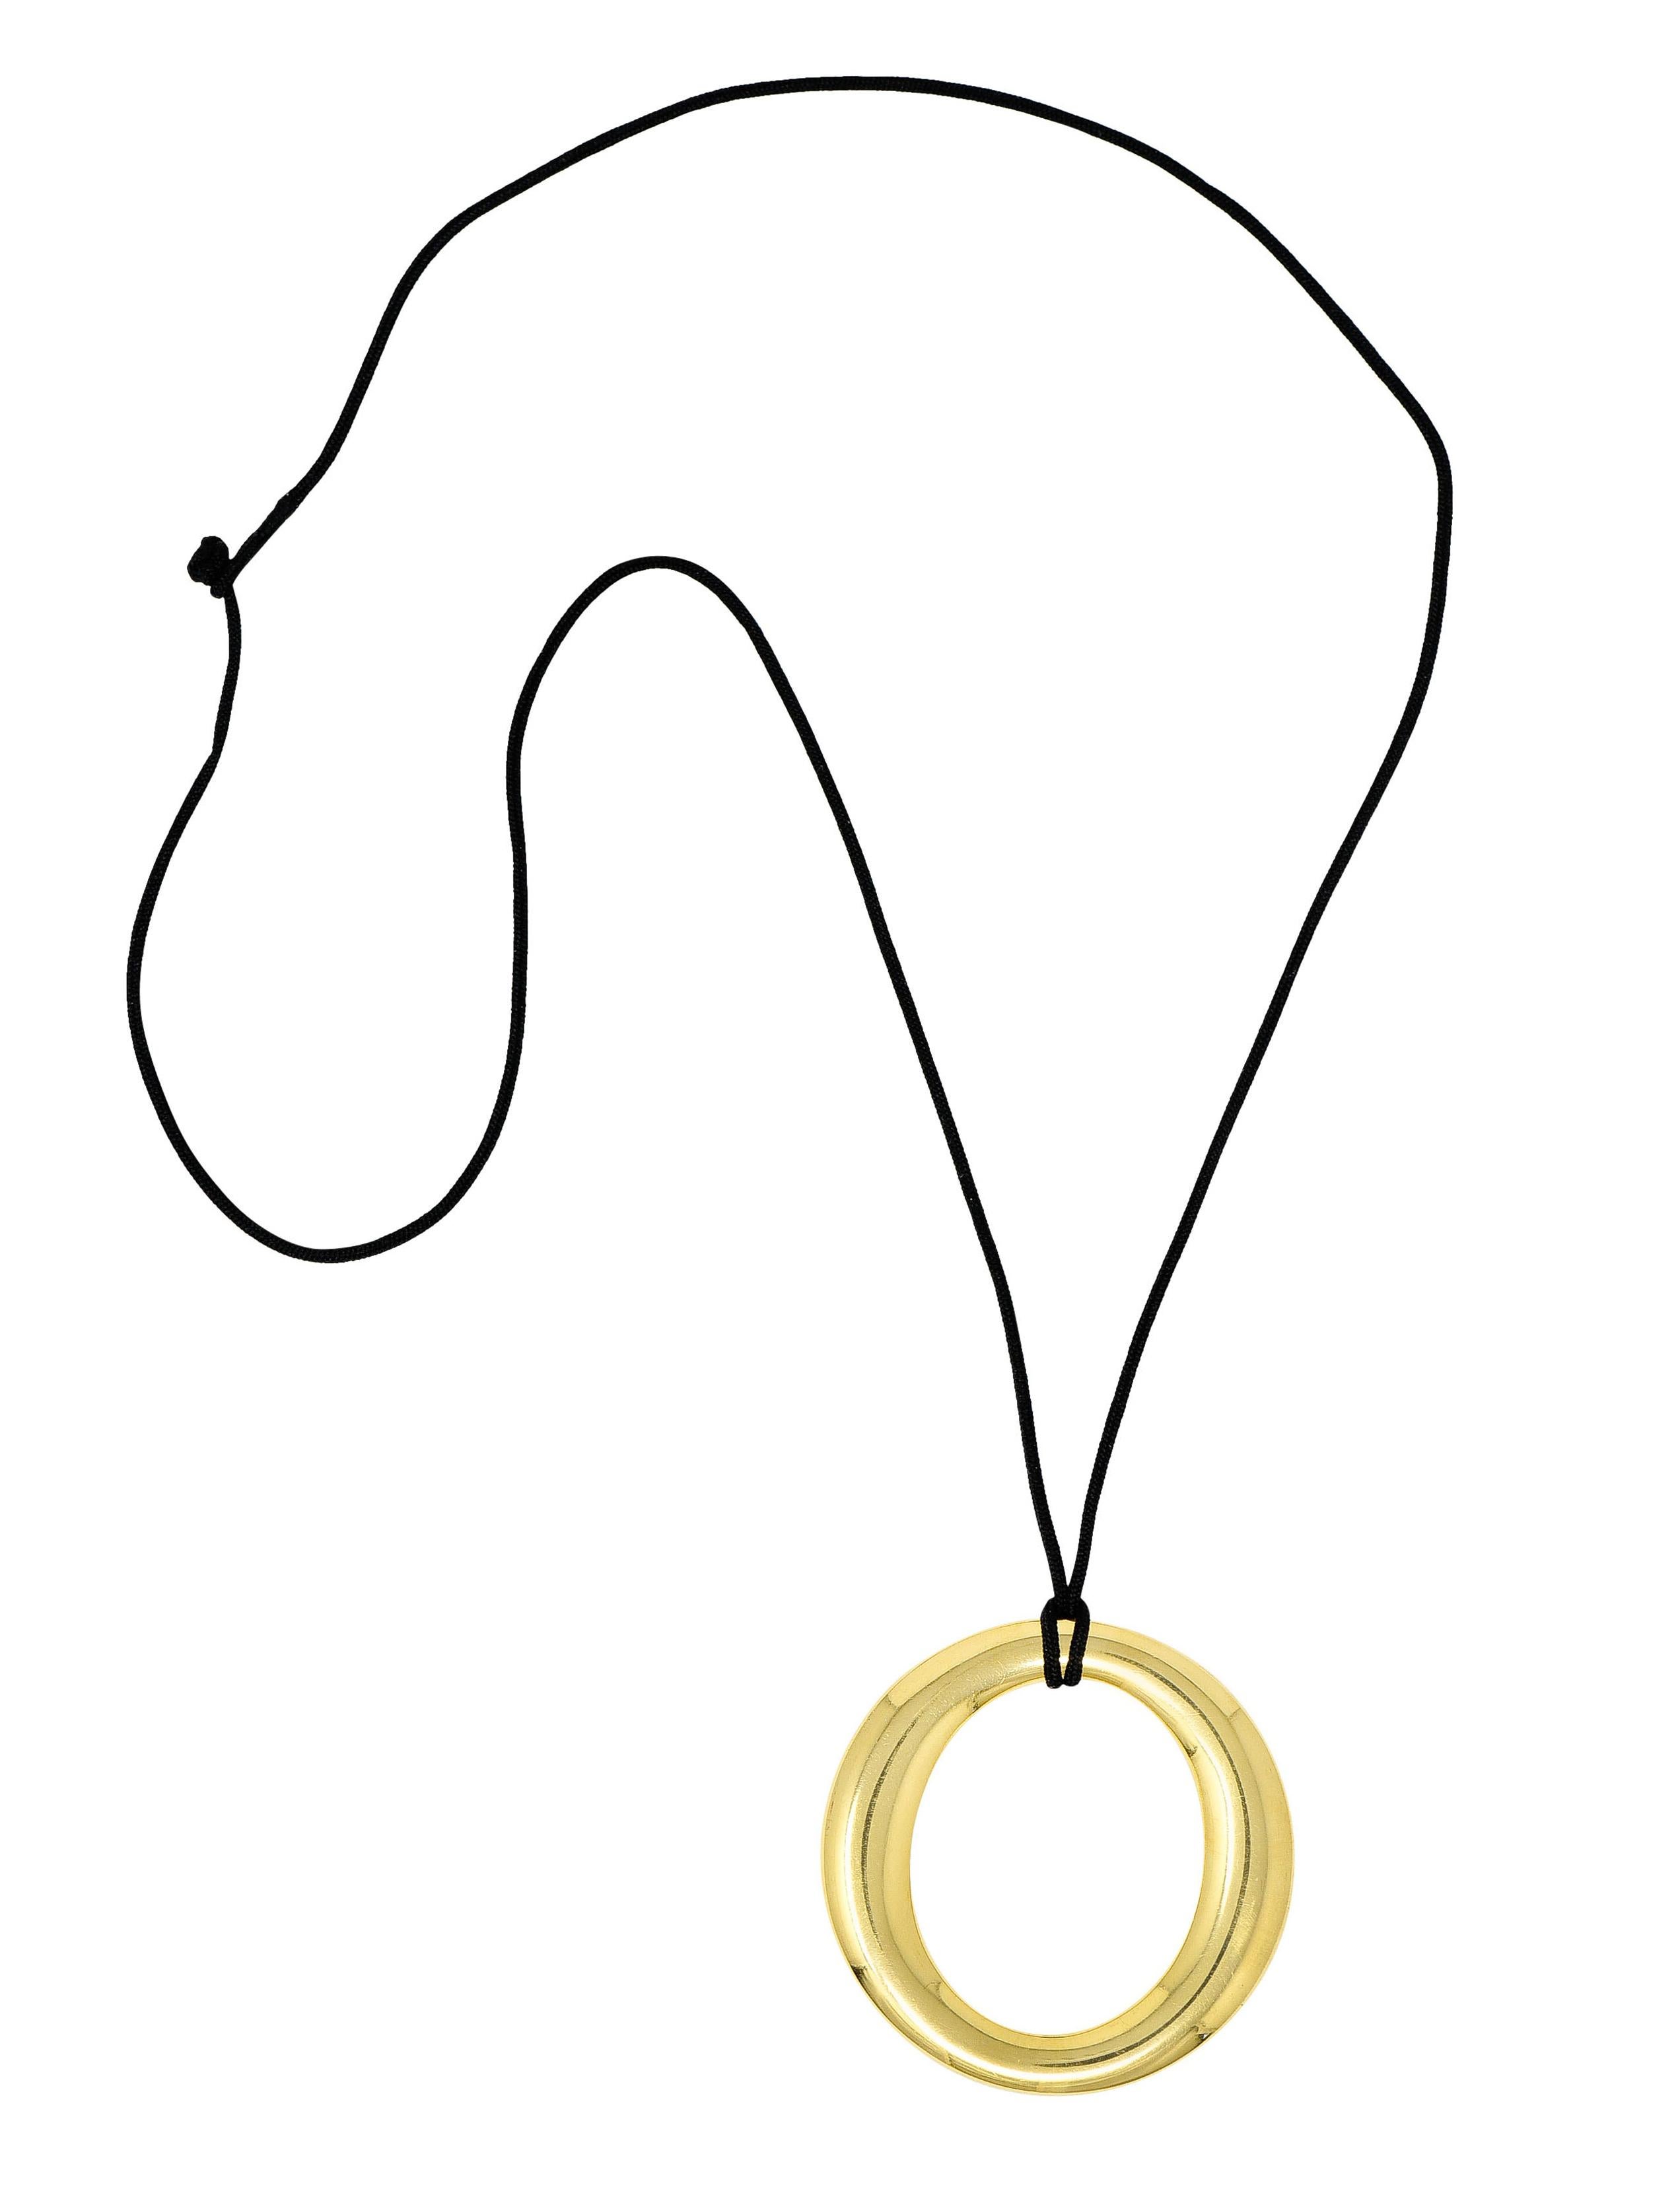 Substantial pendant is designed as a slight ellipse form

With an open center and a brightly polished finish

Suspending from a black silk cord

Stamped 750 for 18 karat gold

Fully signed Elsa Peretti Tiffany & Co. Spain

Circa: 1990s

Length: 25